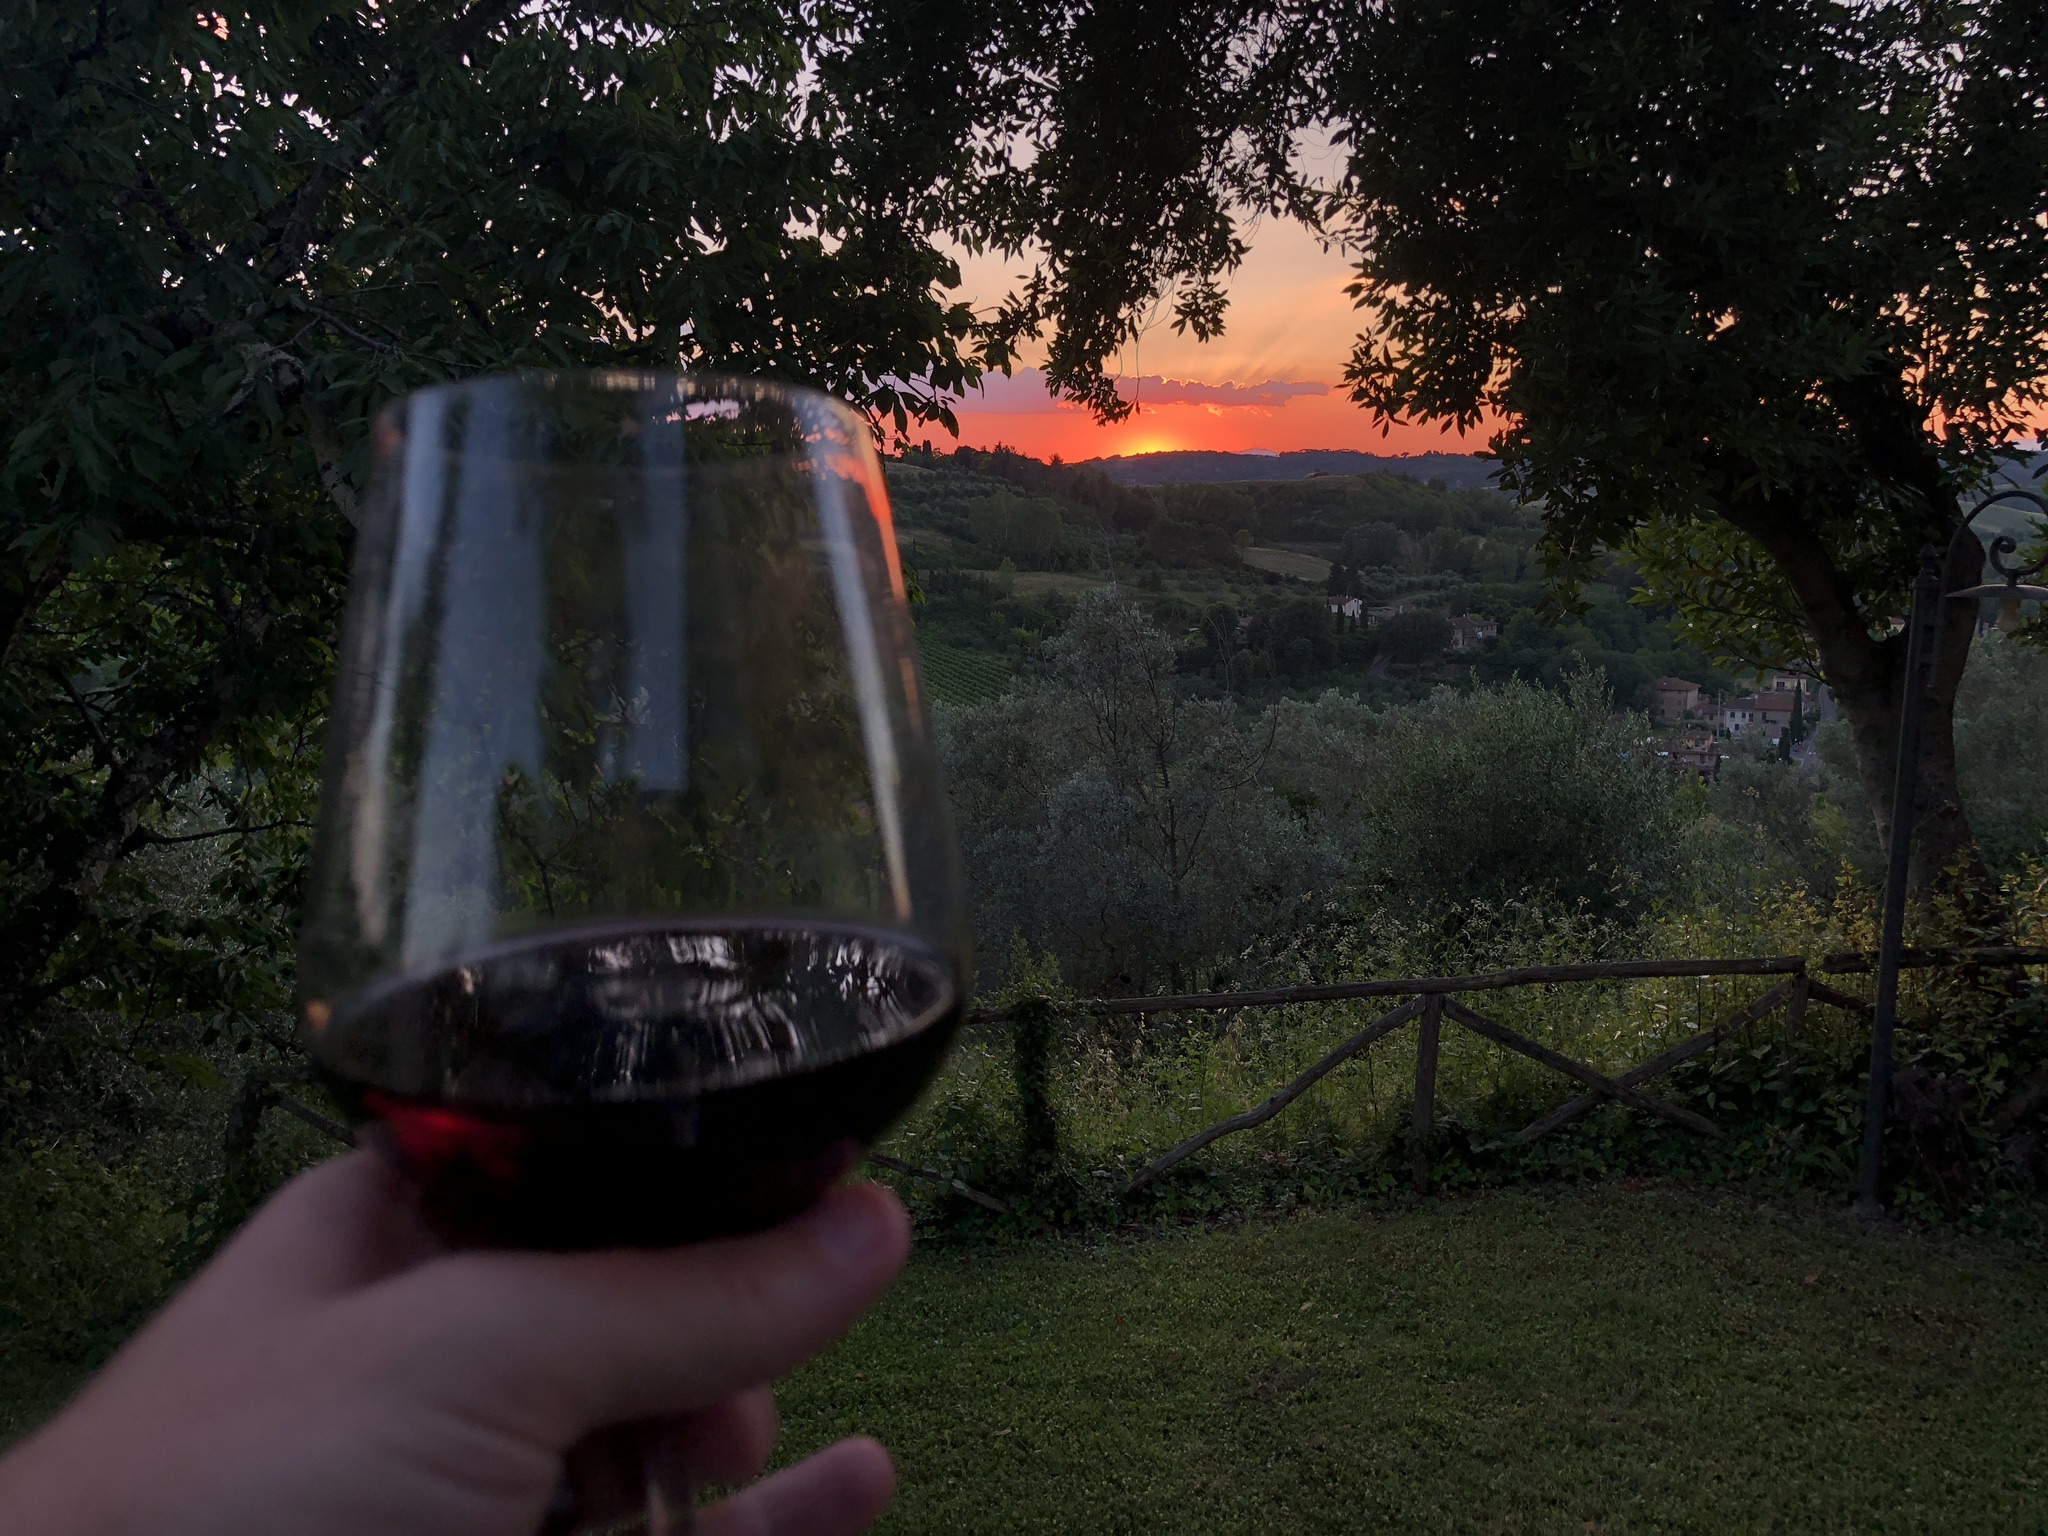 Red wine in Tuscany 